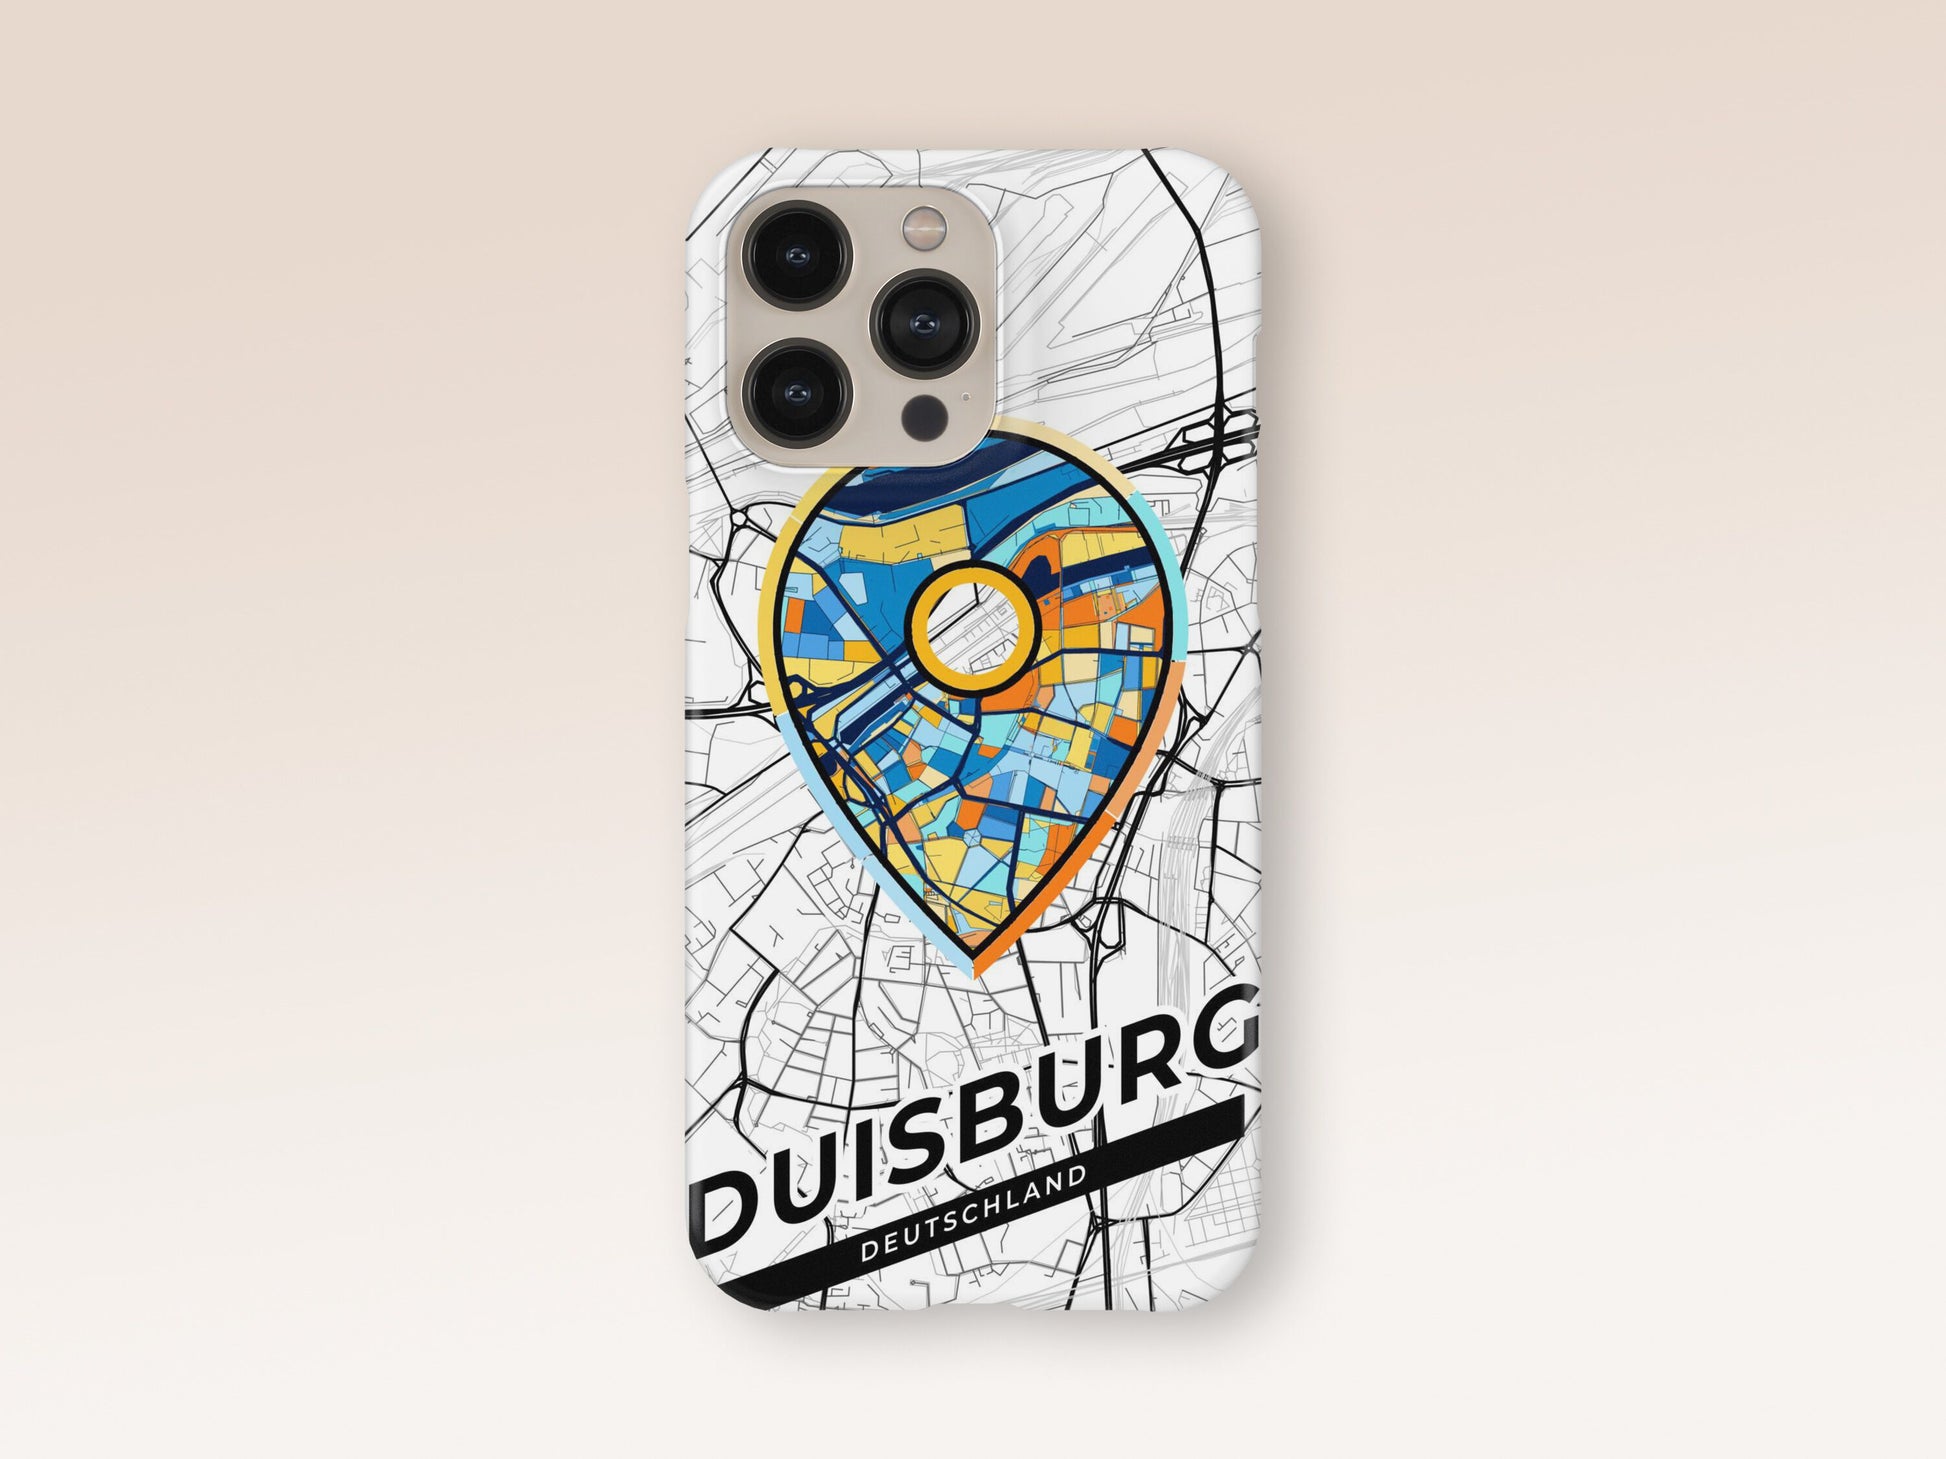 Duisburg Deutschland slim phone case with colorful icon. Birthday, wedding or housewarming gift. Couple match cases. 1